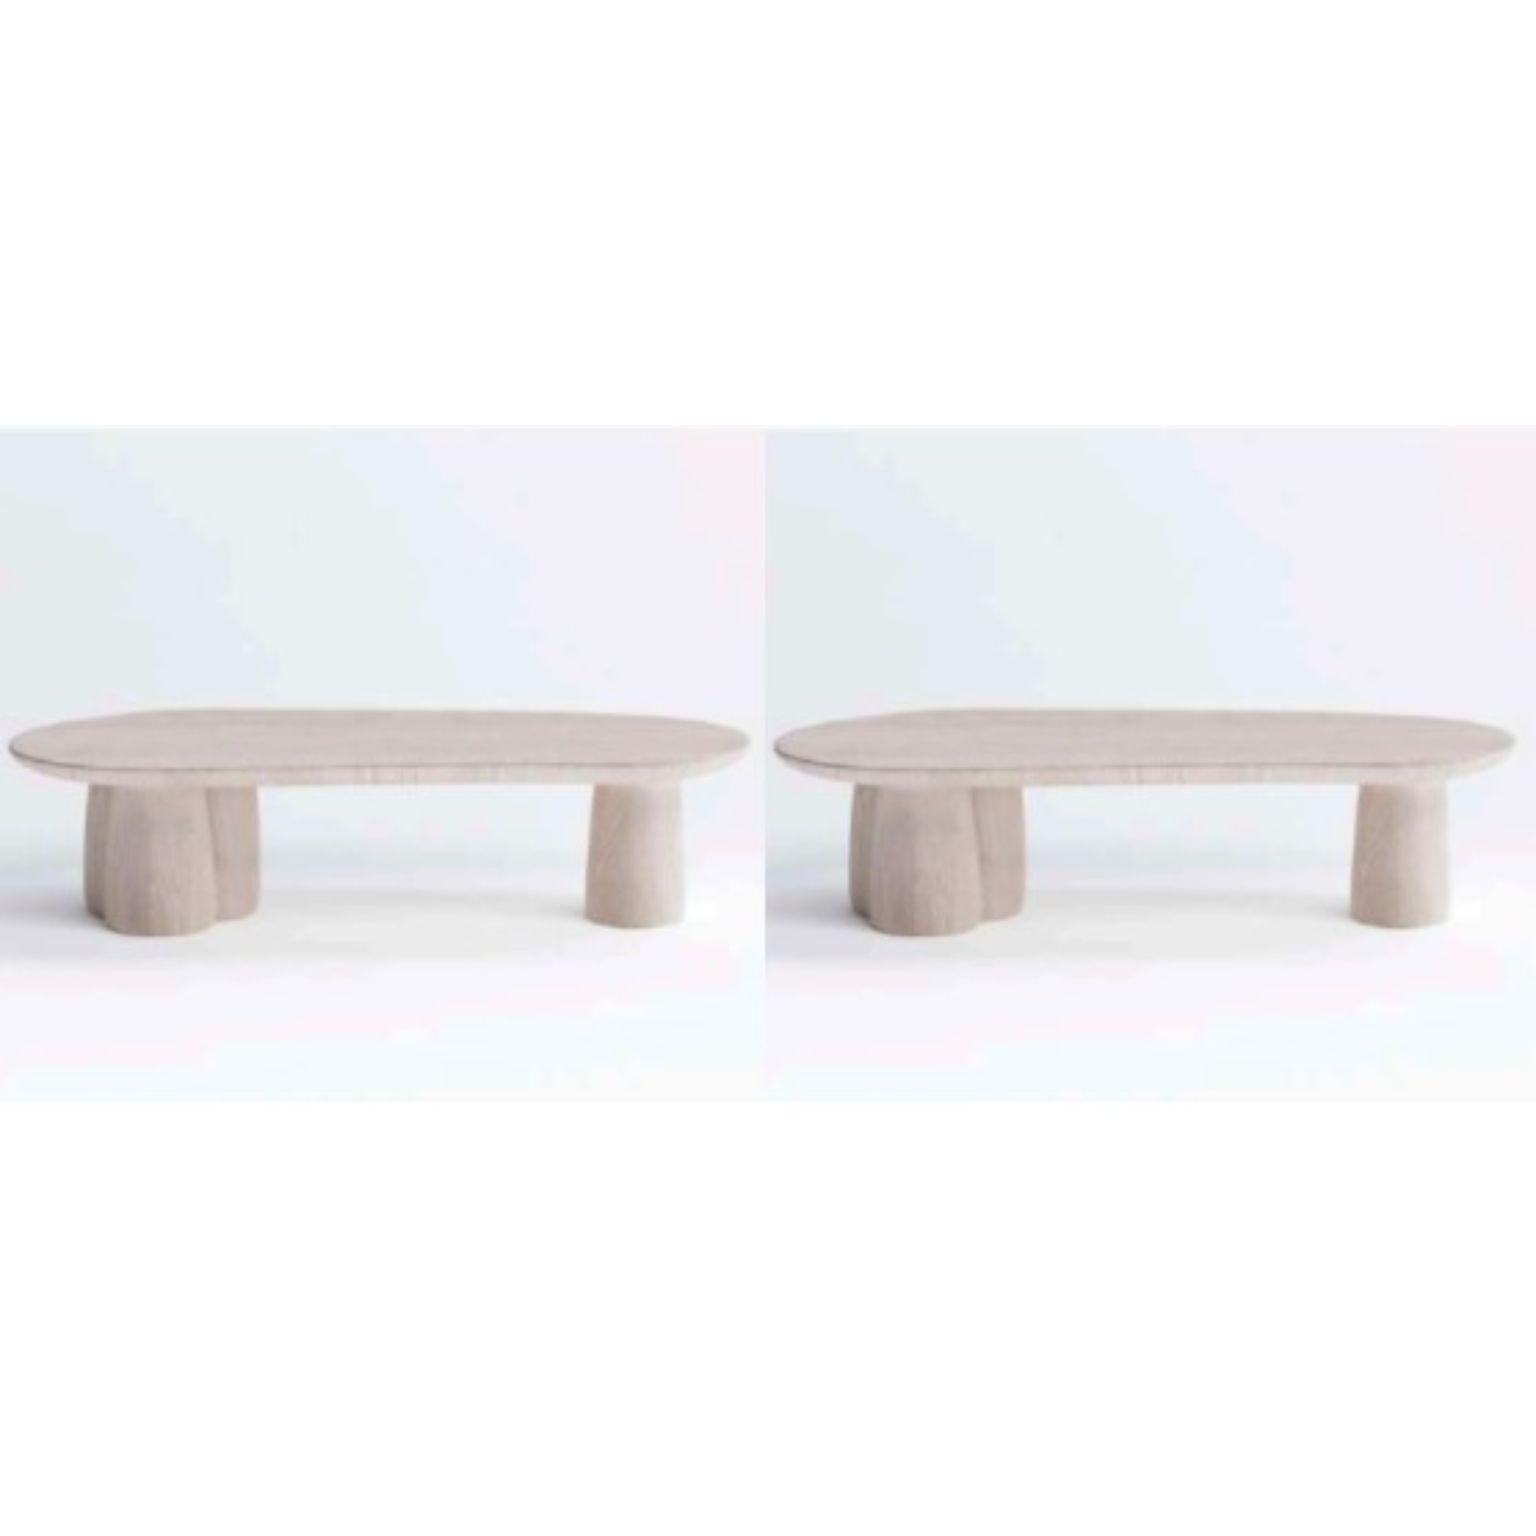 Set of 2 long coffee tables by Faina
Design: Victoriya Yakusha
Materials: ash in natural or black color
Dimensions: W 113 x D 47 x H 29 cm

Like strong sunflower stems, SONIAH tables are fed with energy from the ground, saturating with it the